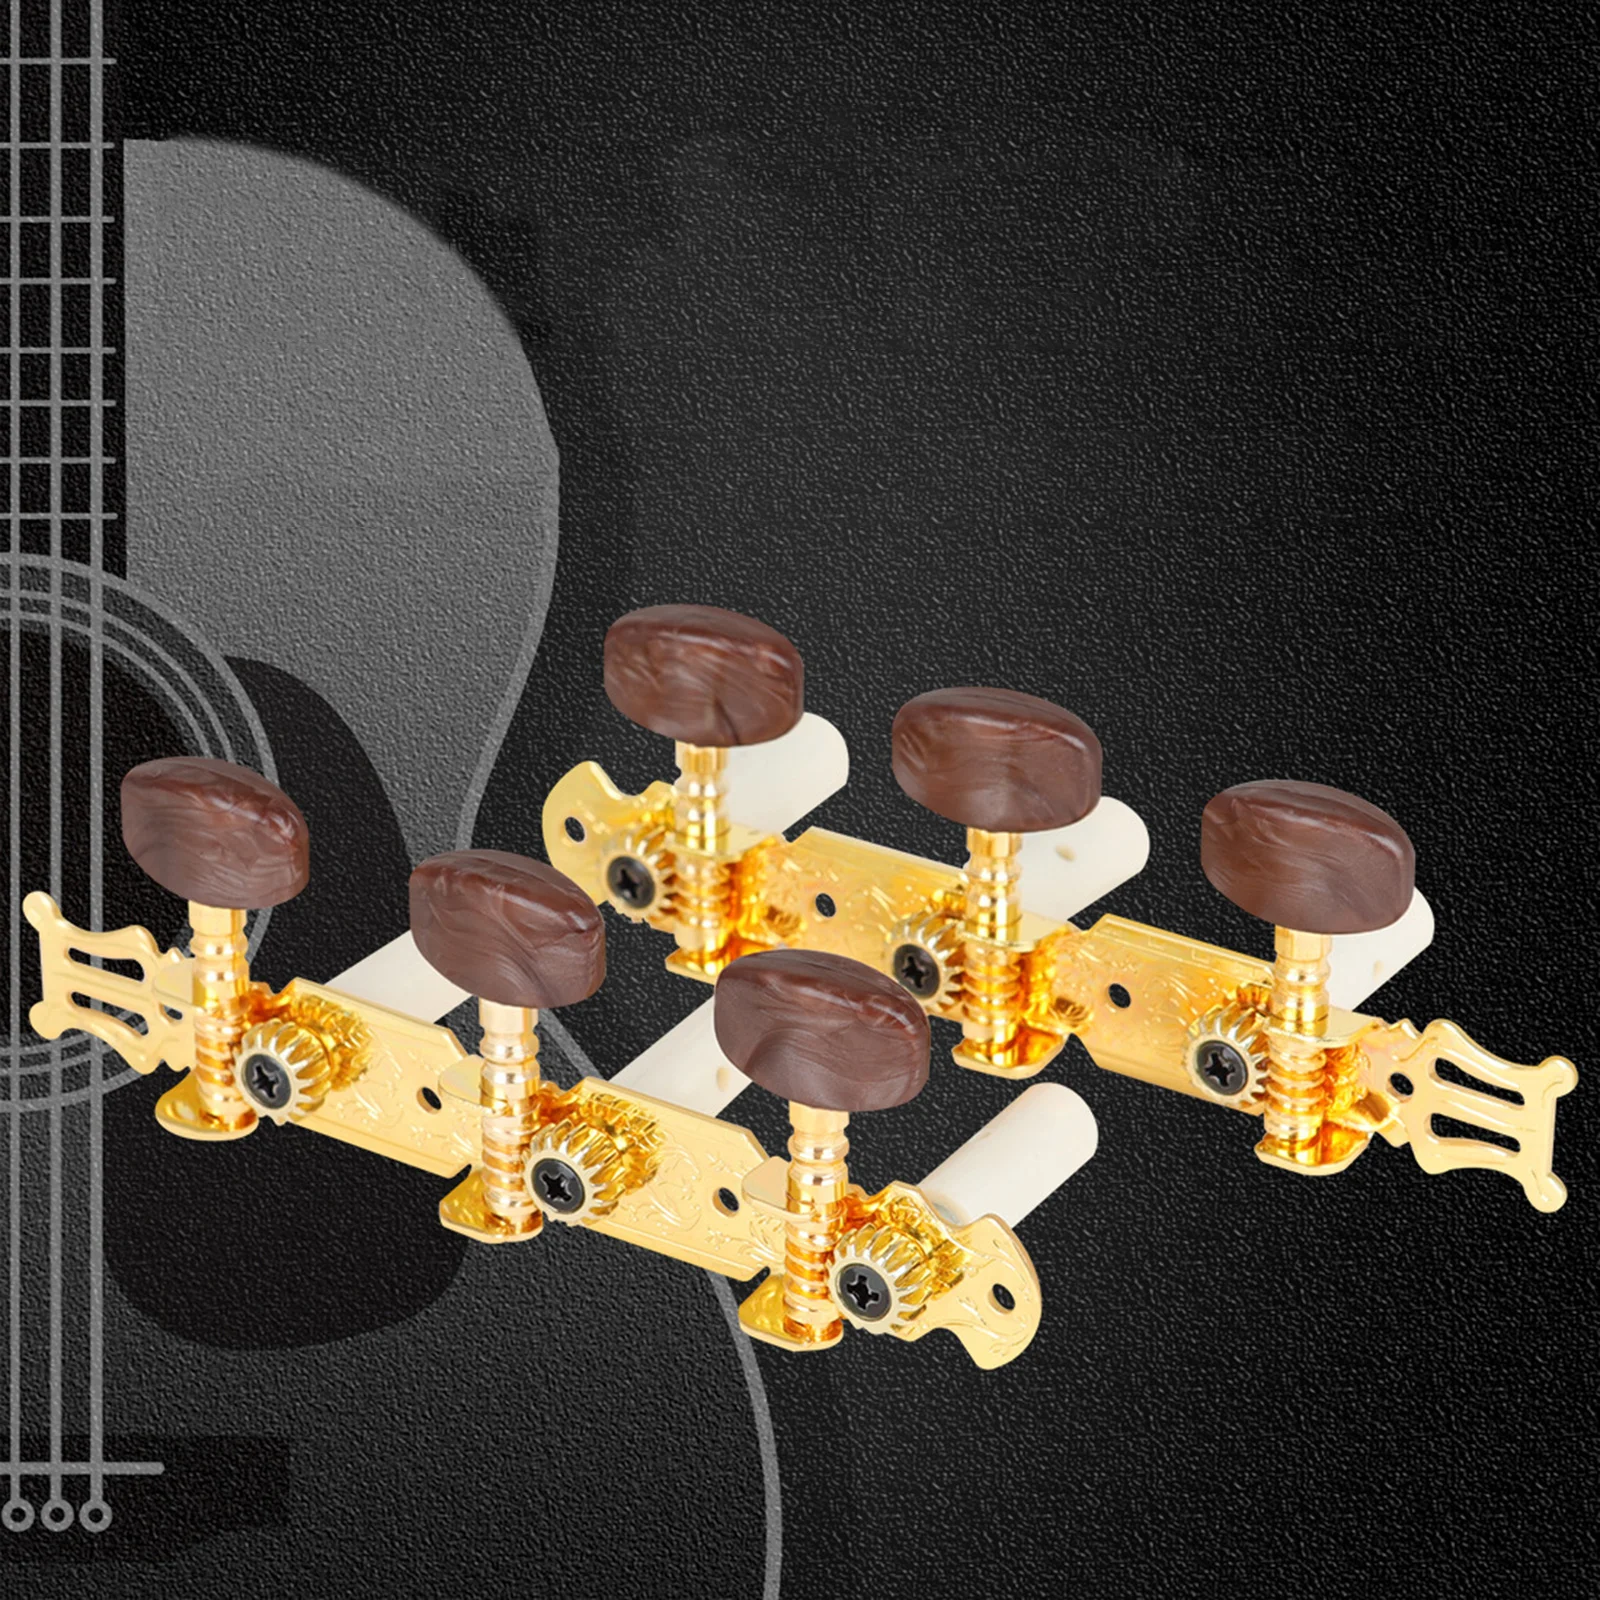 Metal Gold String Tuning Tuners Machine Keys Head 14:1 Left Right 3L3R for Classical Guitar Luthier DIY Accessory Parts